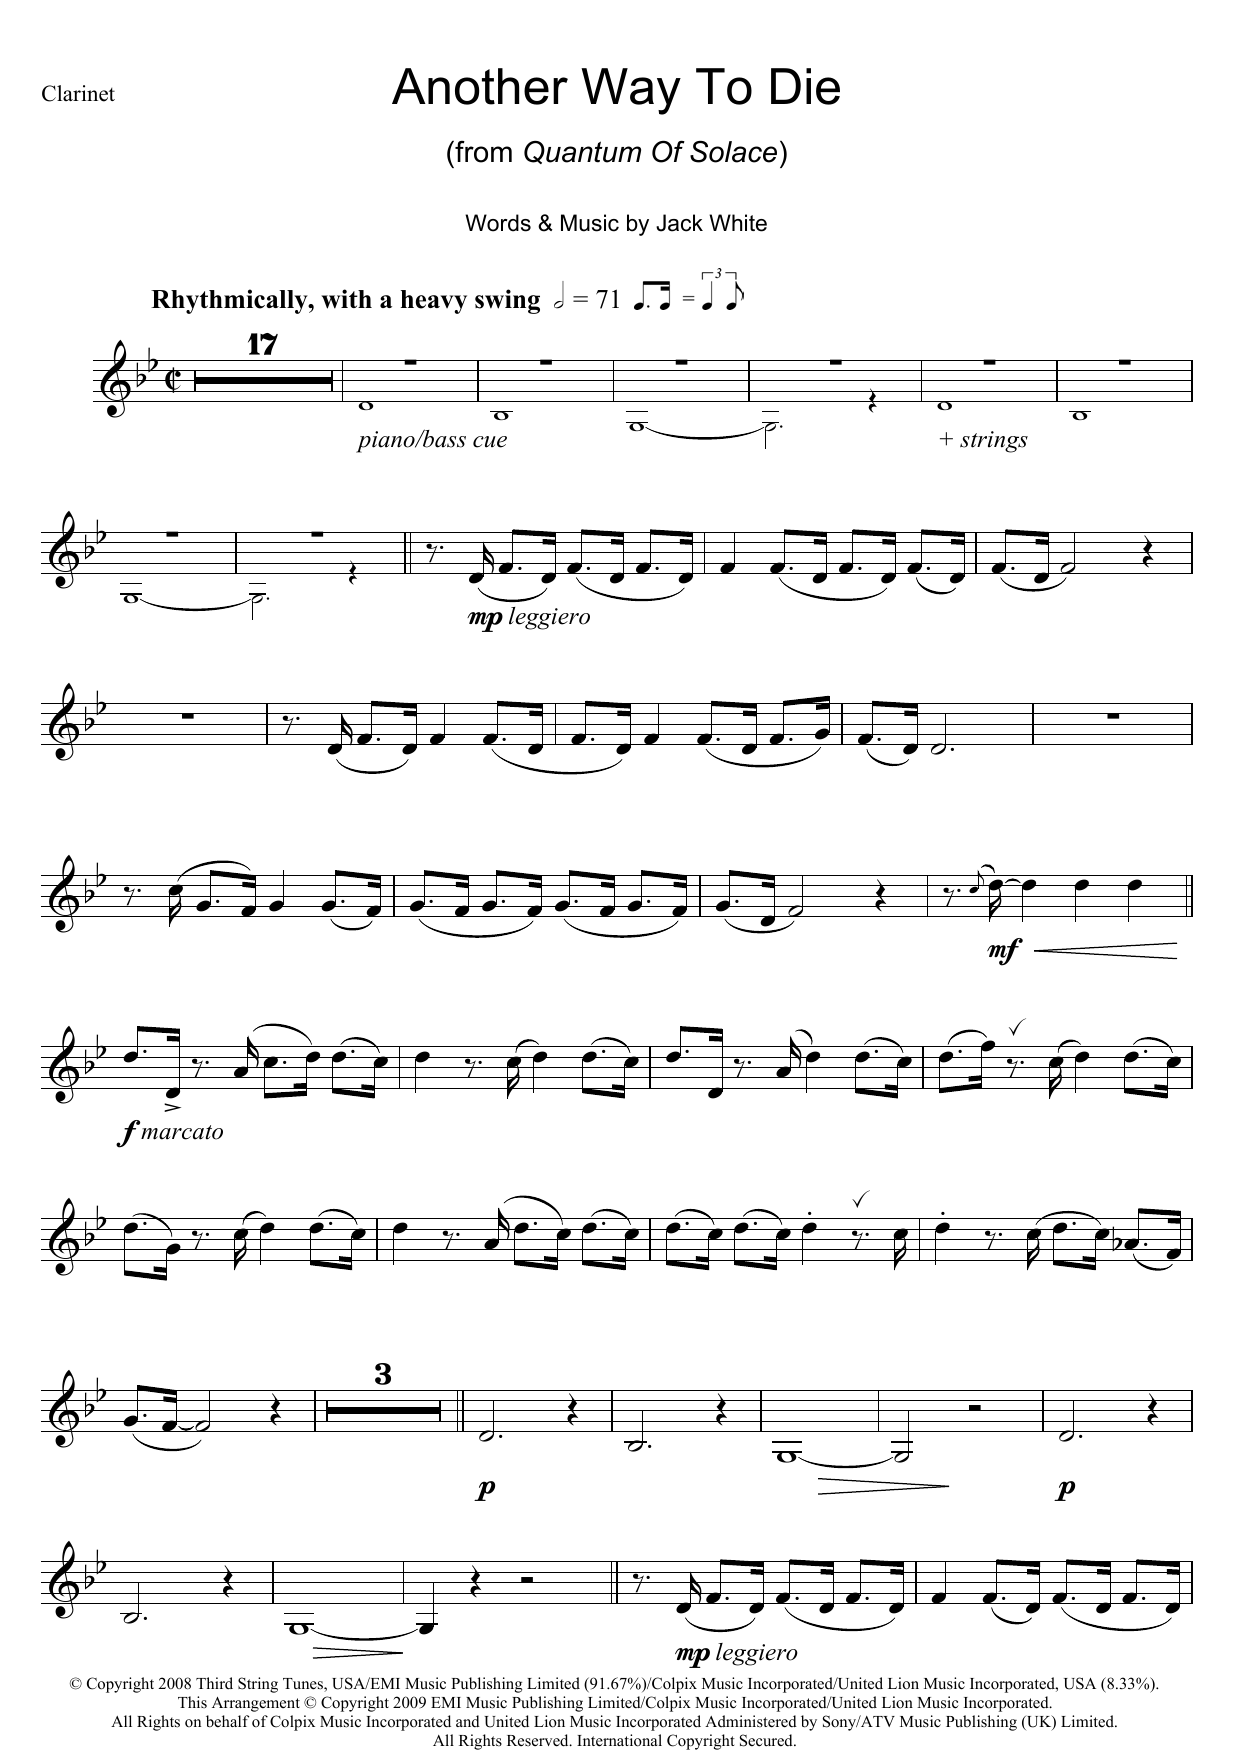 Download Jack White & Alicia Keys Another Way To Die Sheet Music